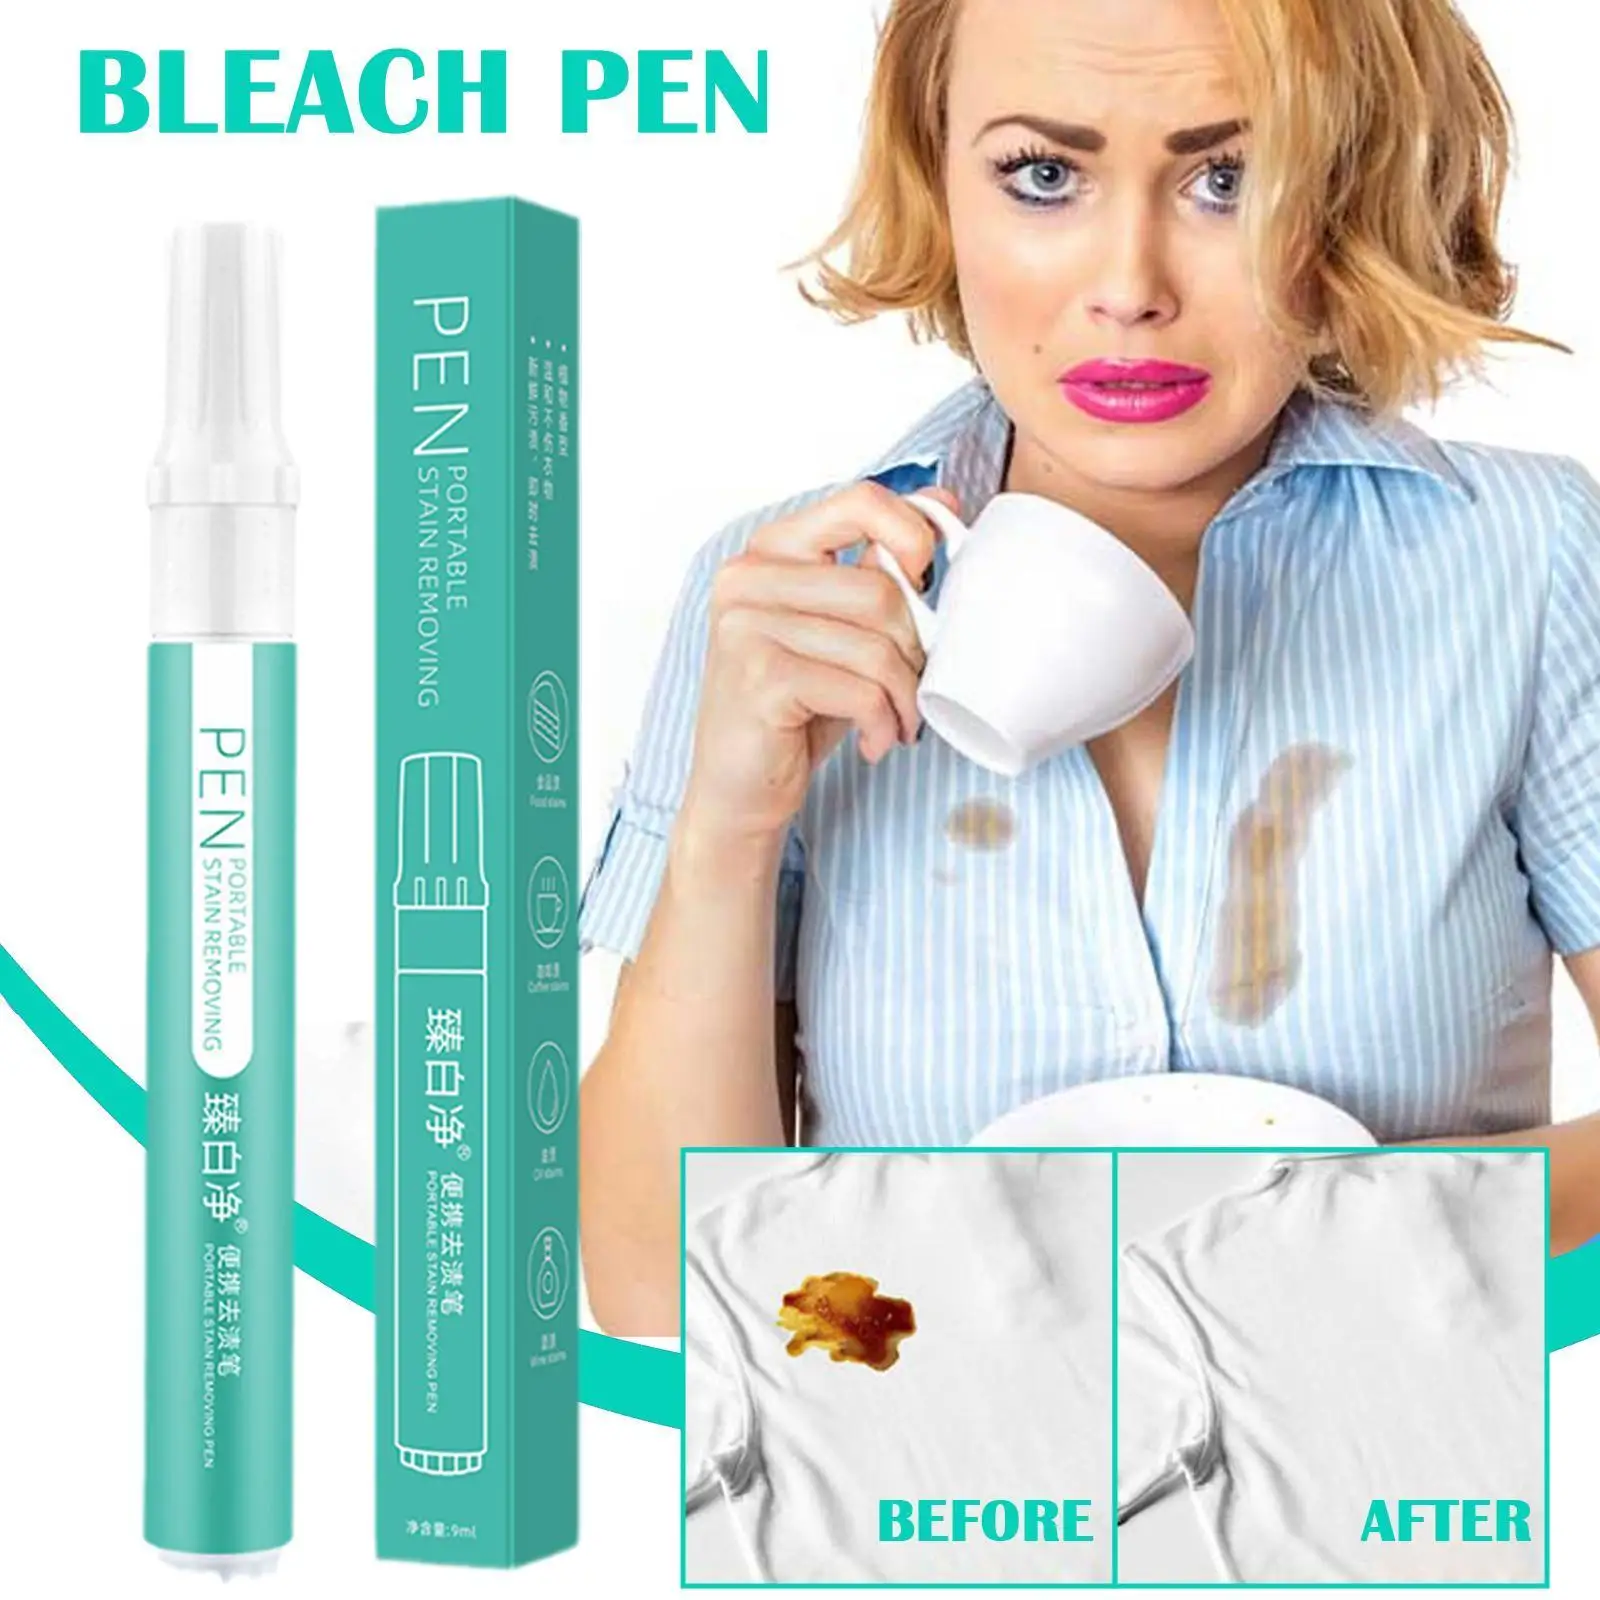 

9ml Portable Bleach Pen For Clothing Quick Stain Removal Grease Stain Remover Laundry Clean Pen Instant Dirt Emergency Trea I1S1